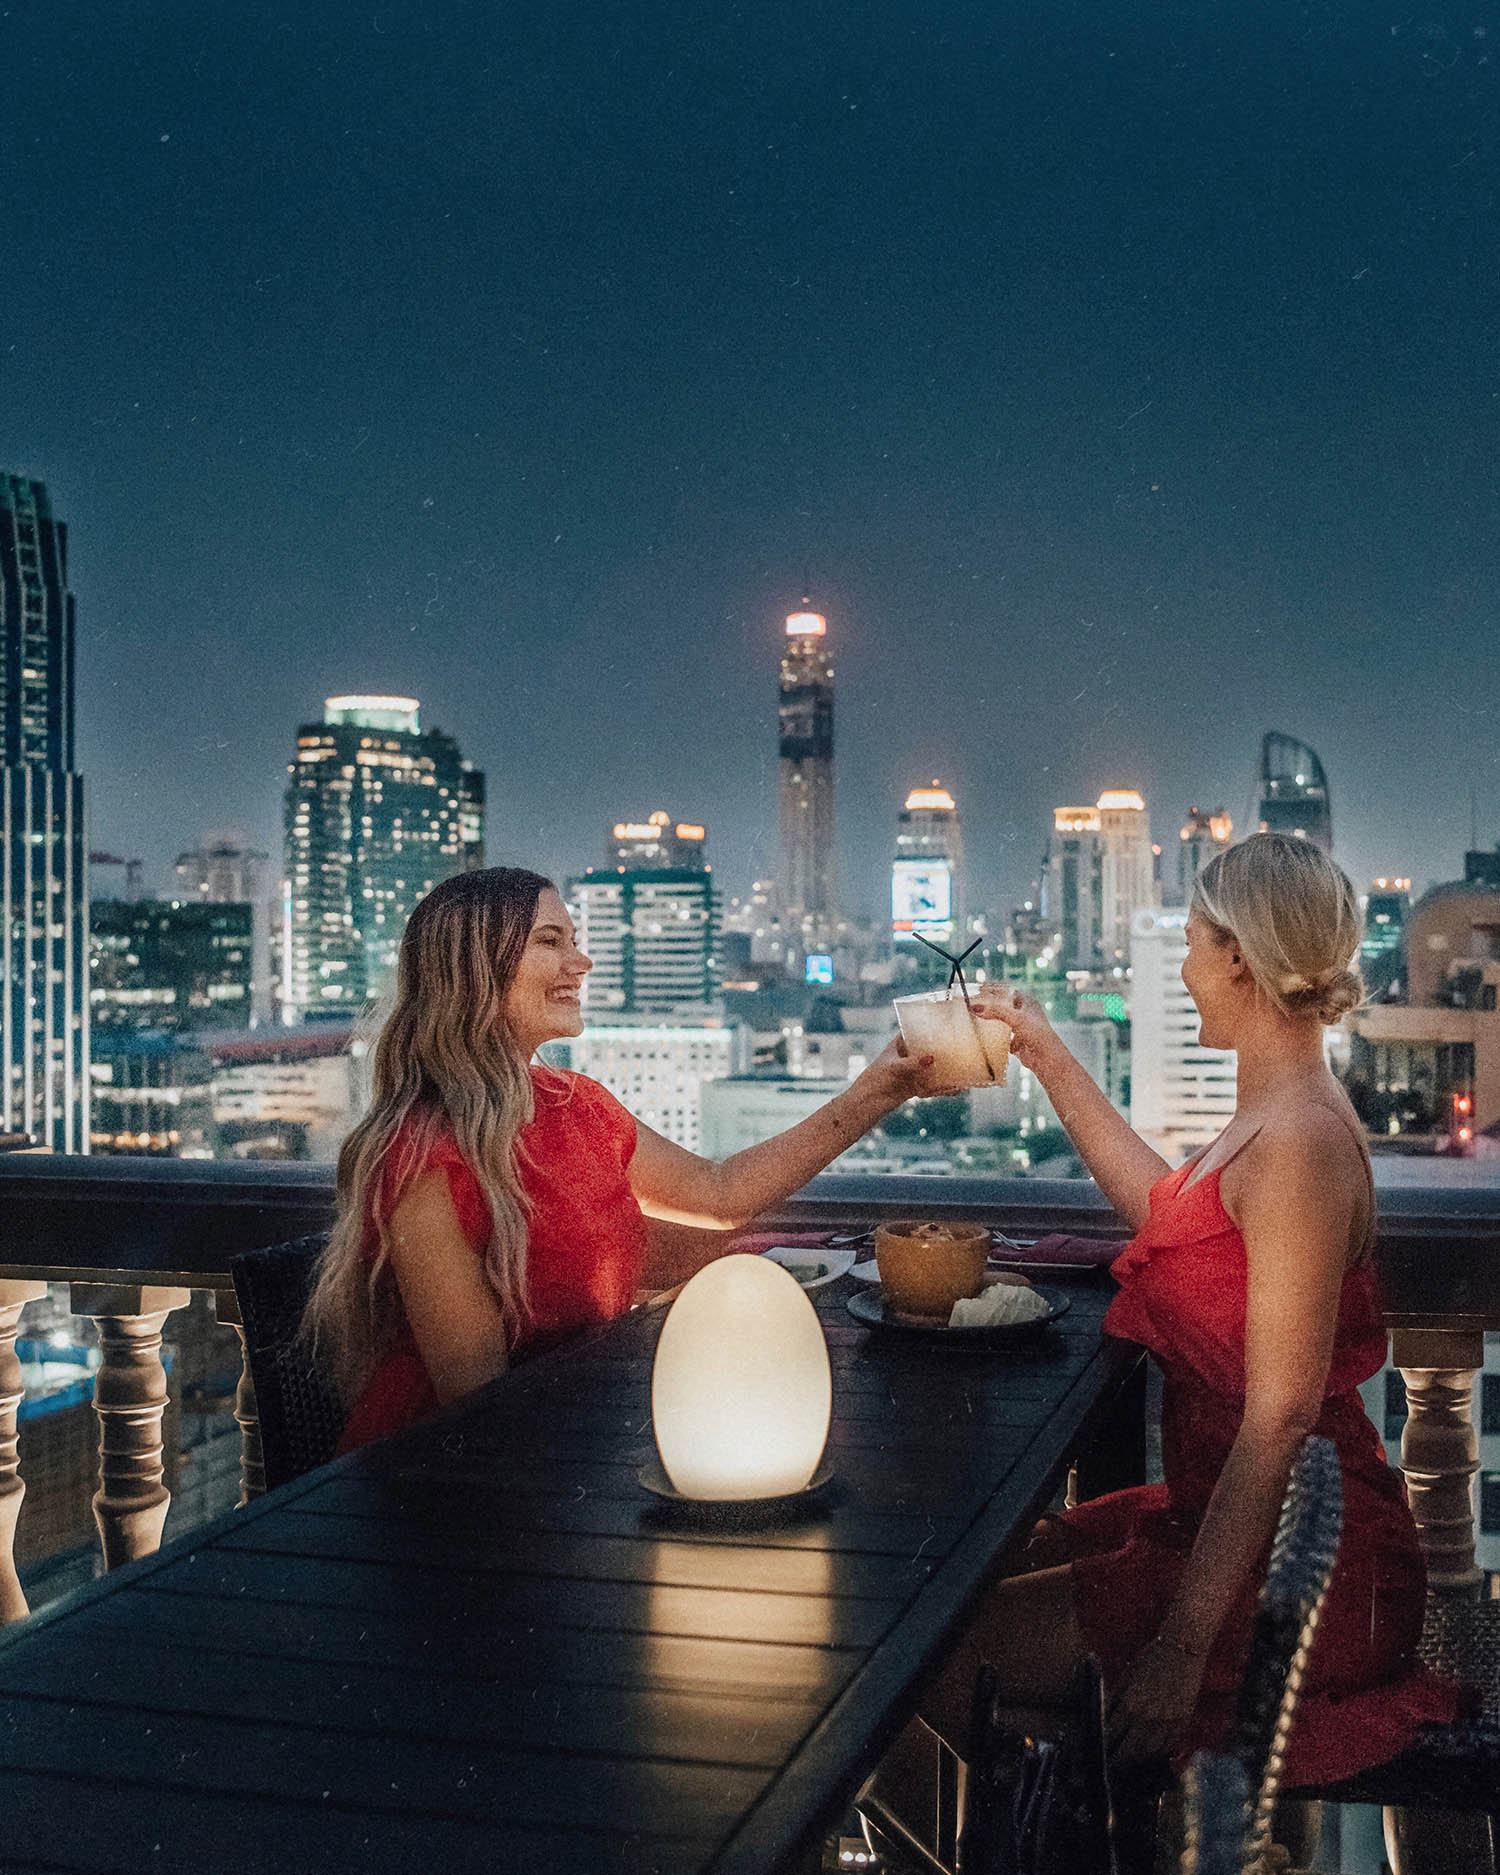 Two girls in red dresses sharing a toast - Rooftop Bar at Muse Hotel in Bangkok, Thailand